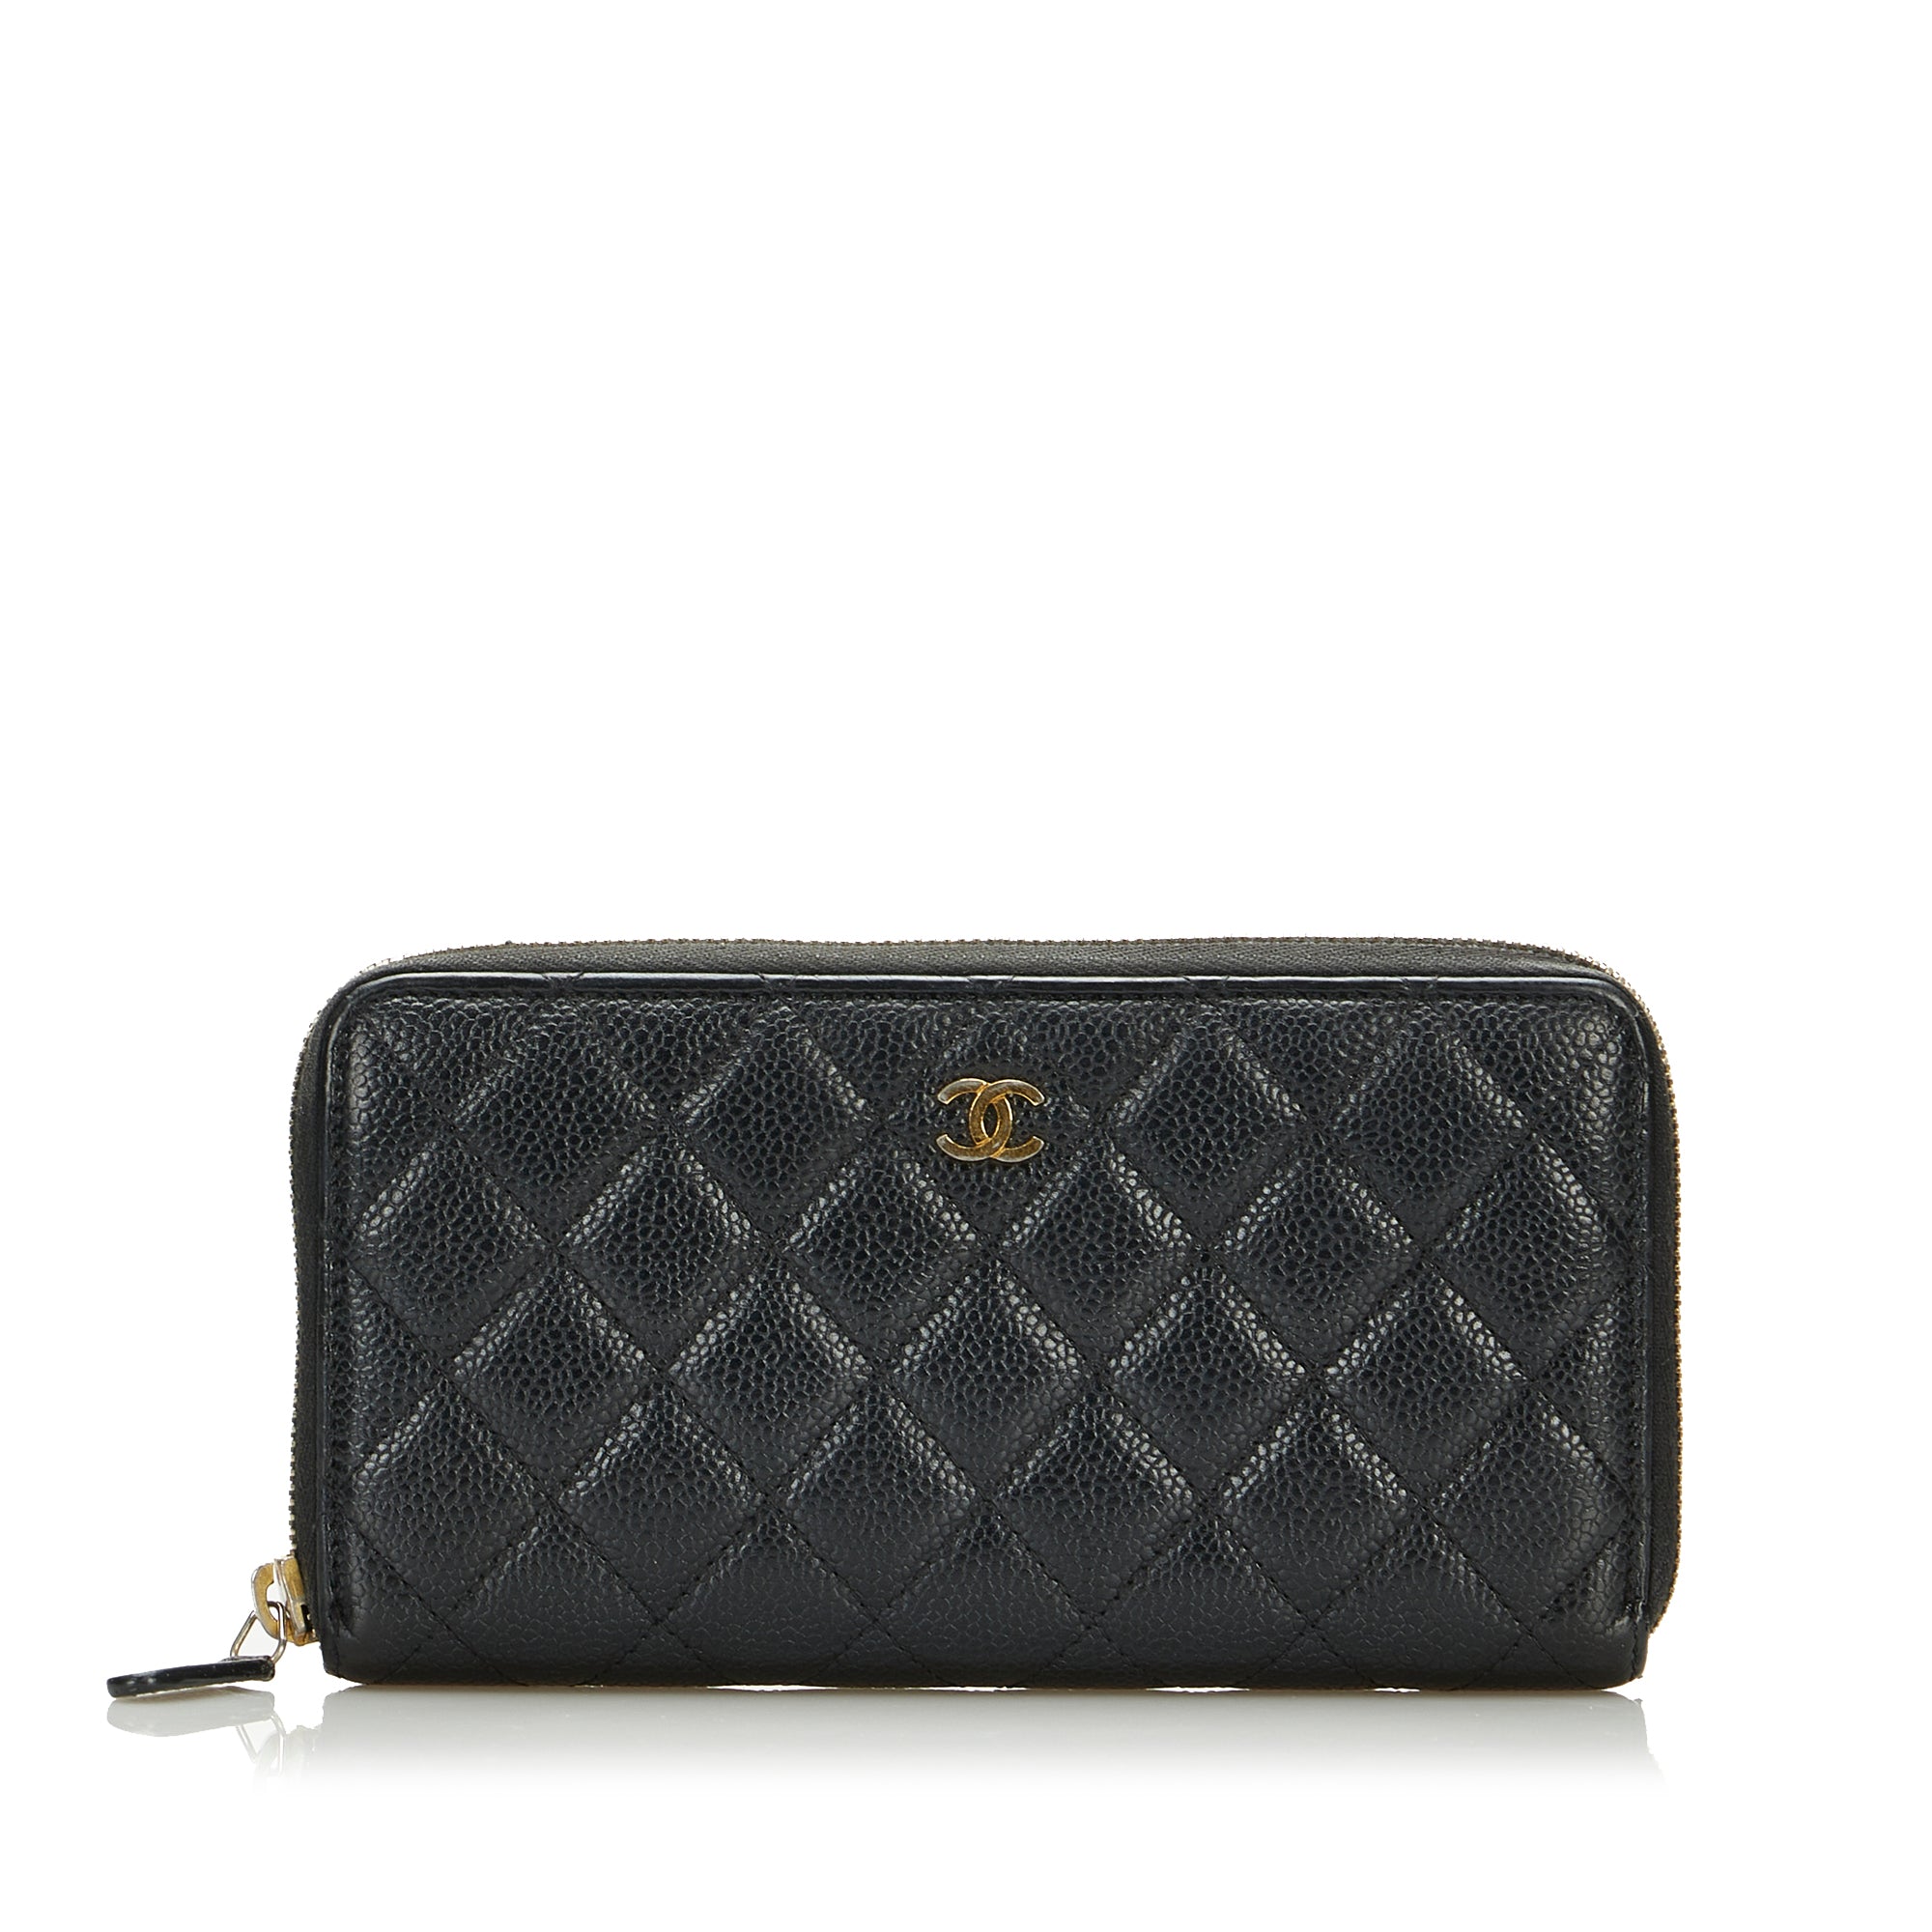 CHANEL Chanel Classic CC Caviar Zip Around Wallet Black with Gold Hardware - Vault 55